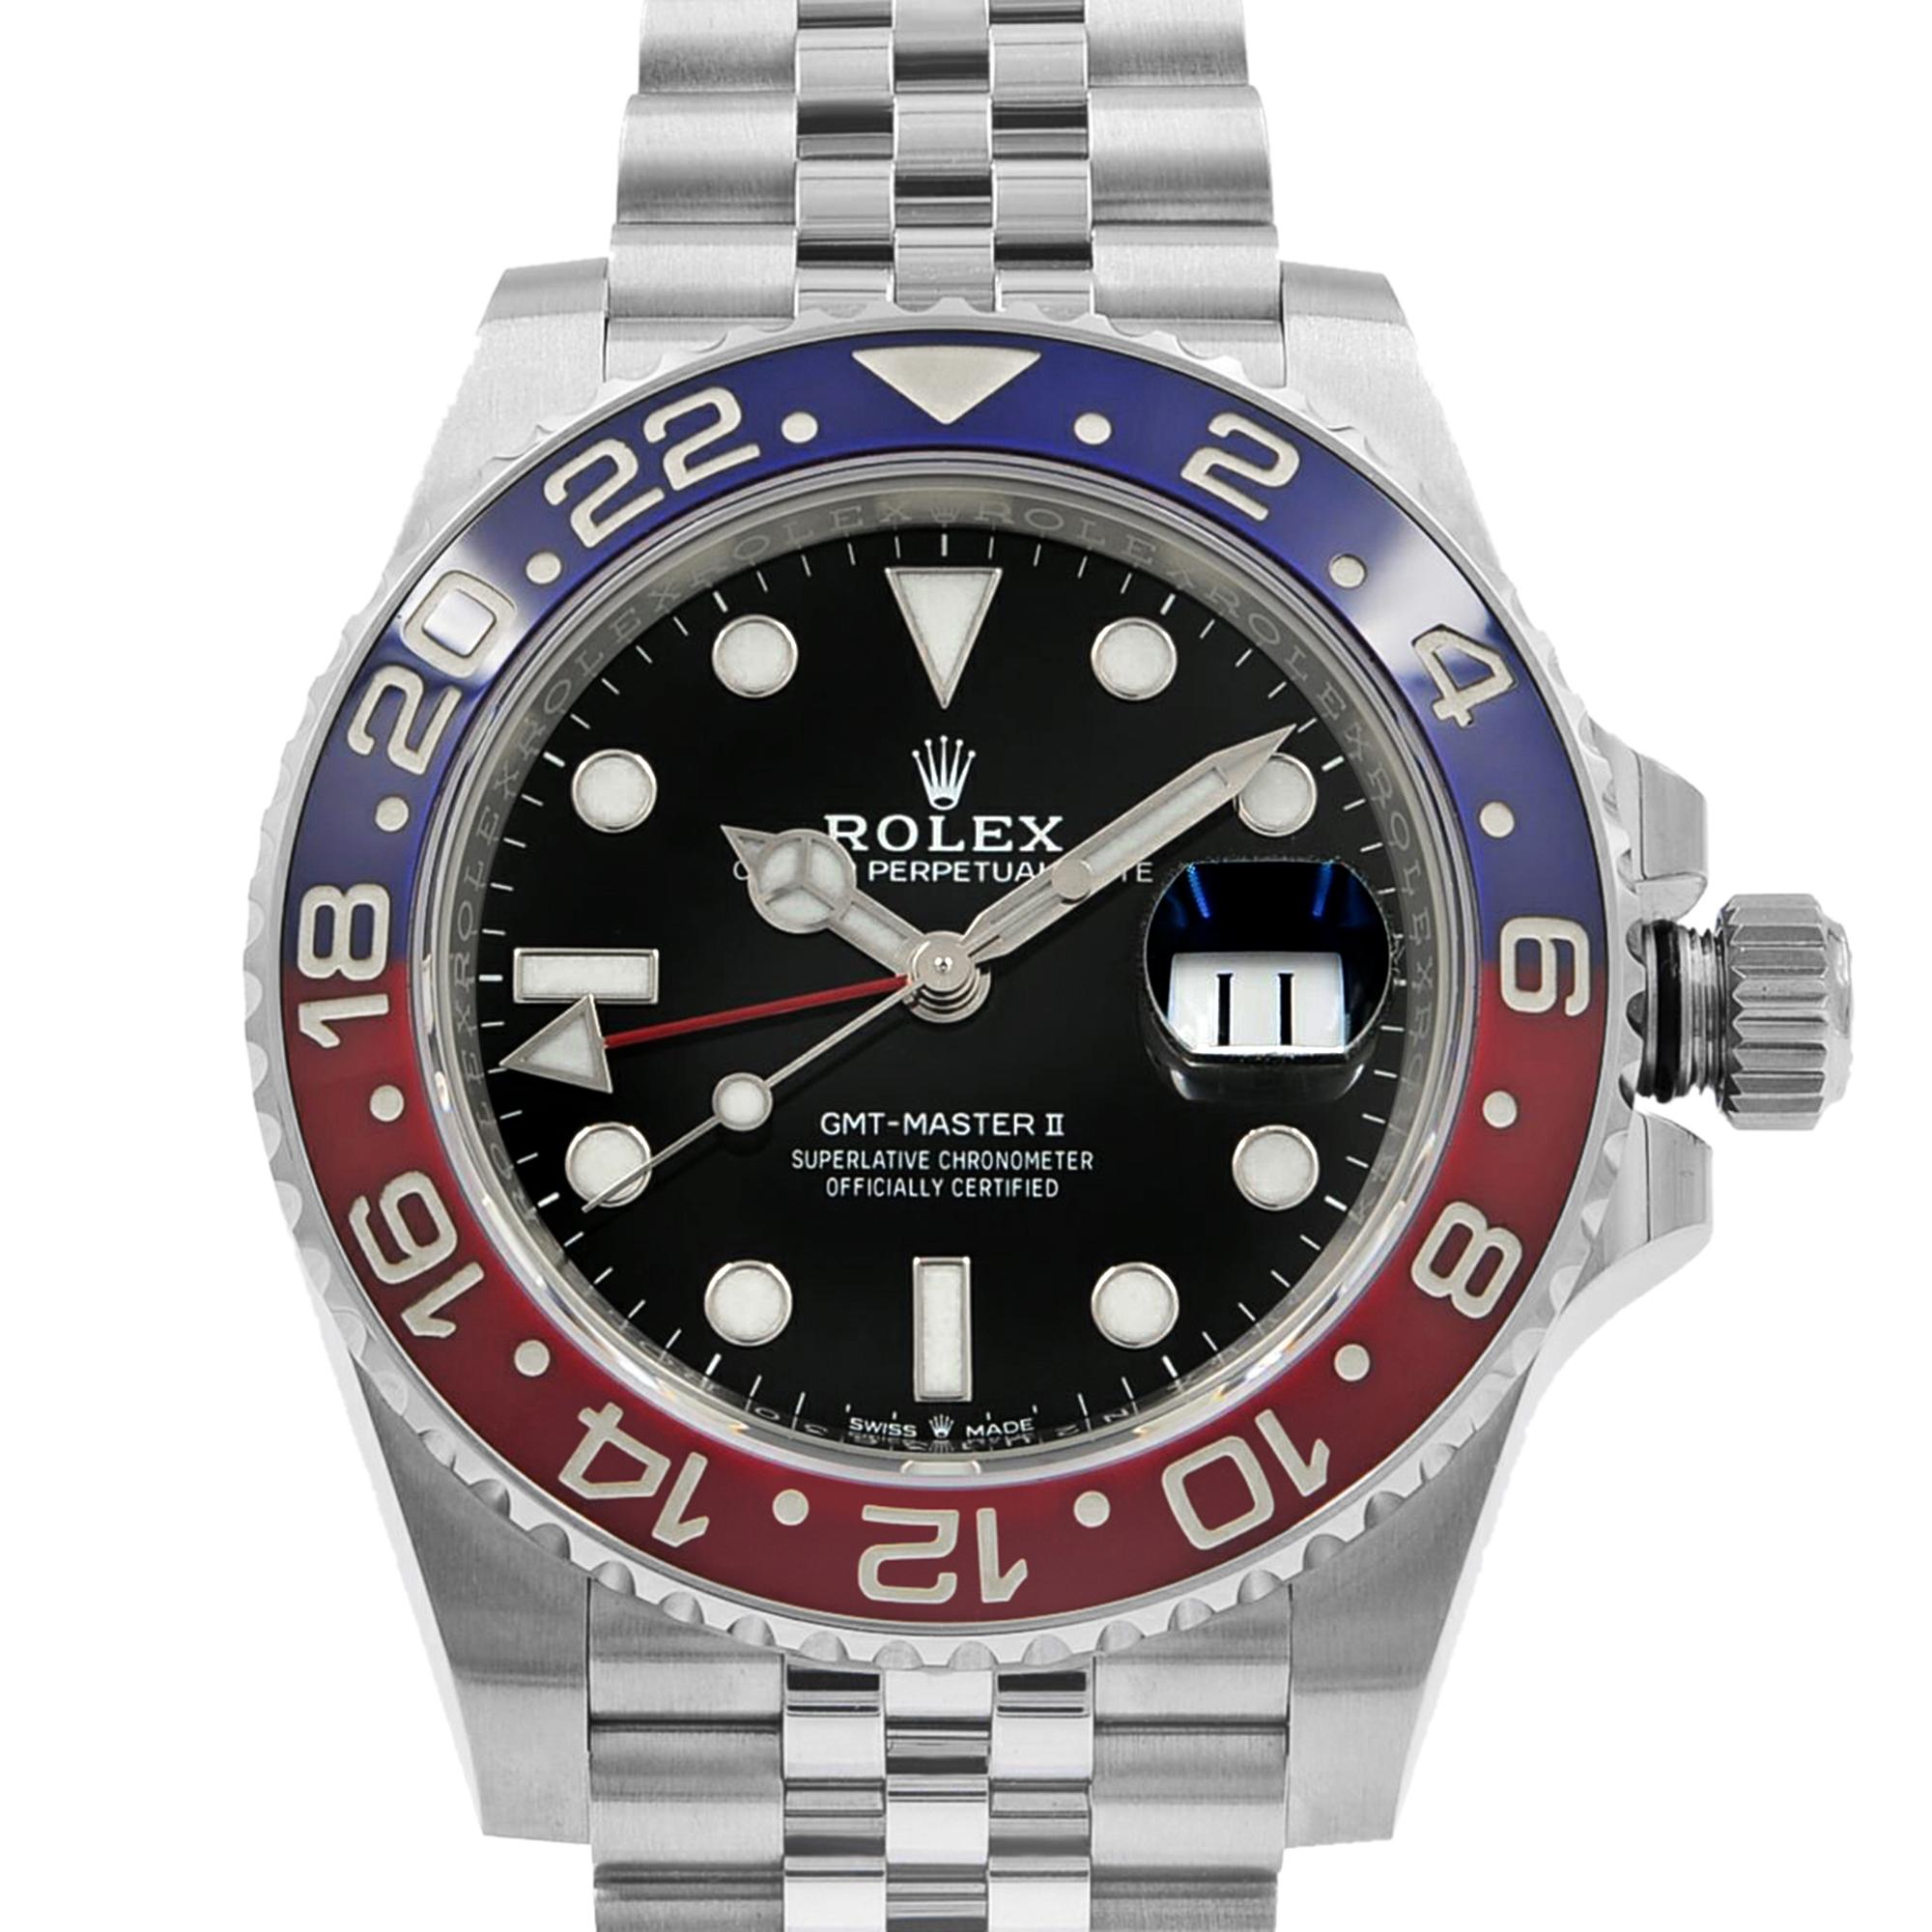 This brand new Rolex GMT-Master II 126710BLRO is a beautiful men's timepiece that is powered by an automatic movement which is cased in a stainless steel case. It has a round shape face, date, dual time dial, and has hand sticks & dots style